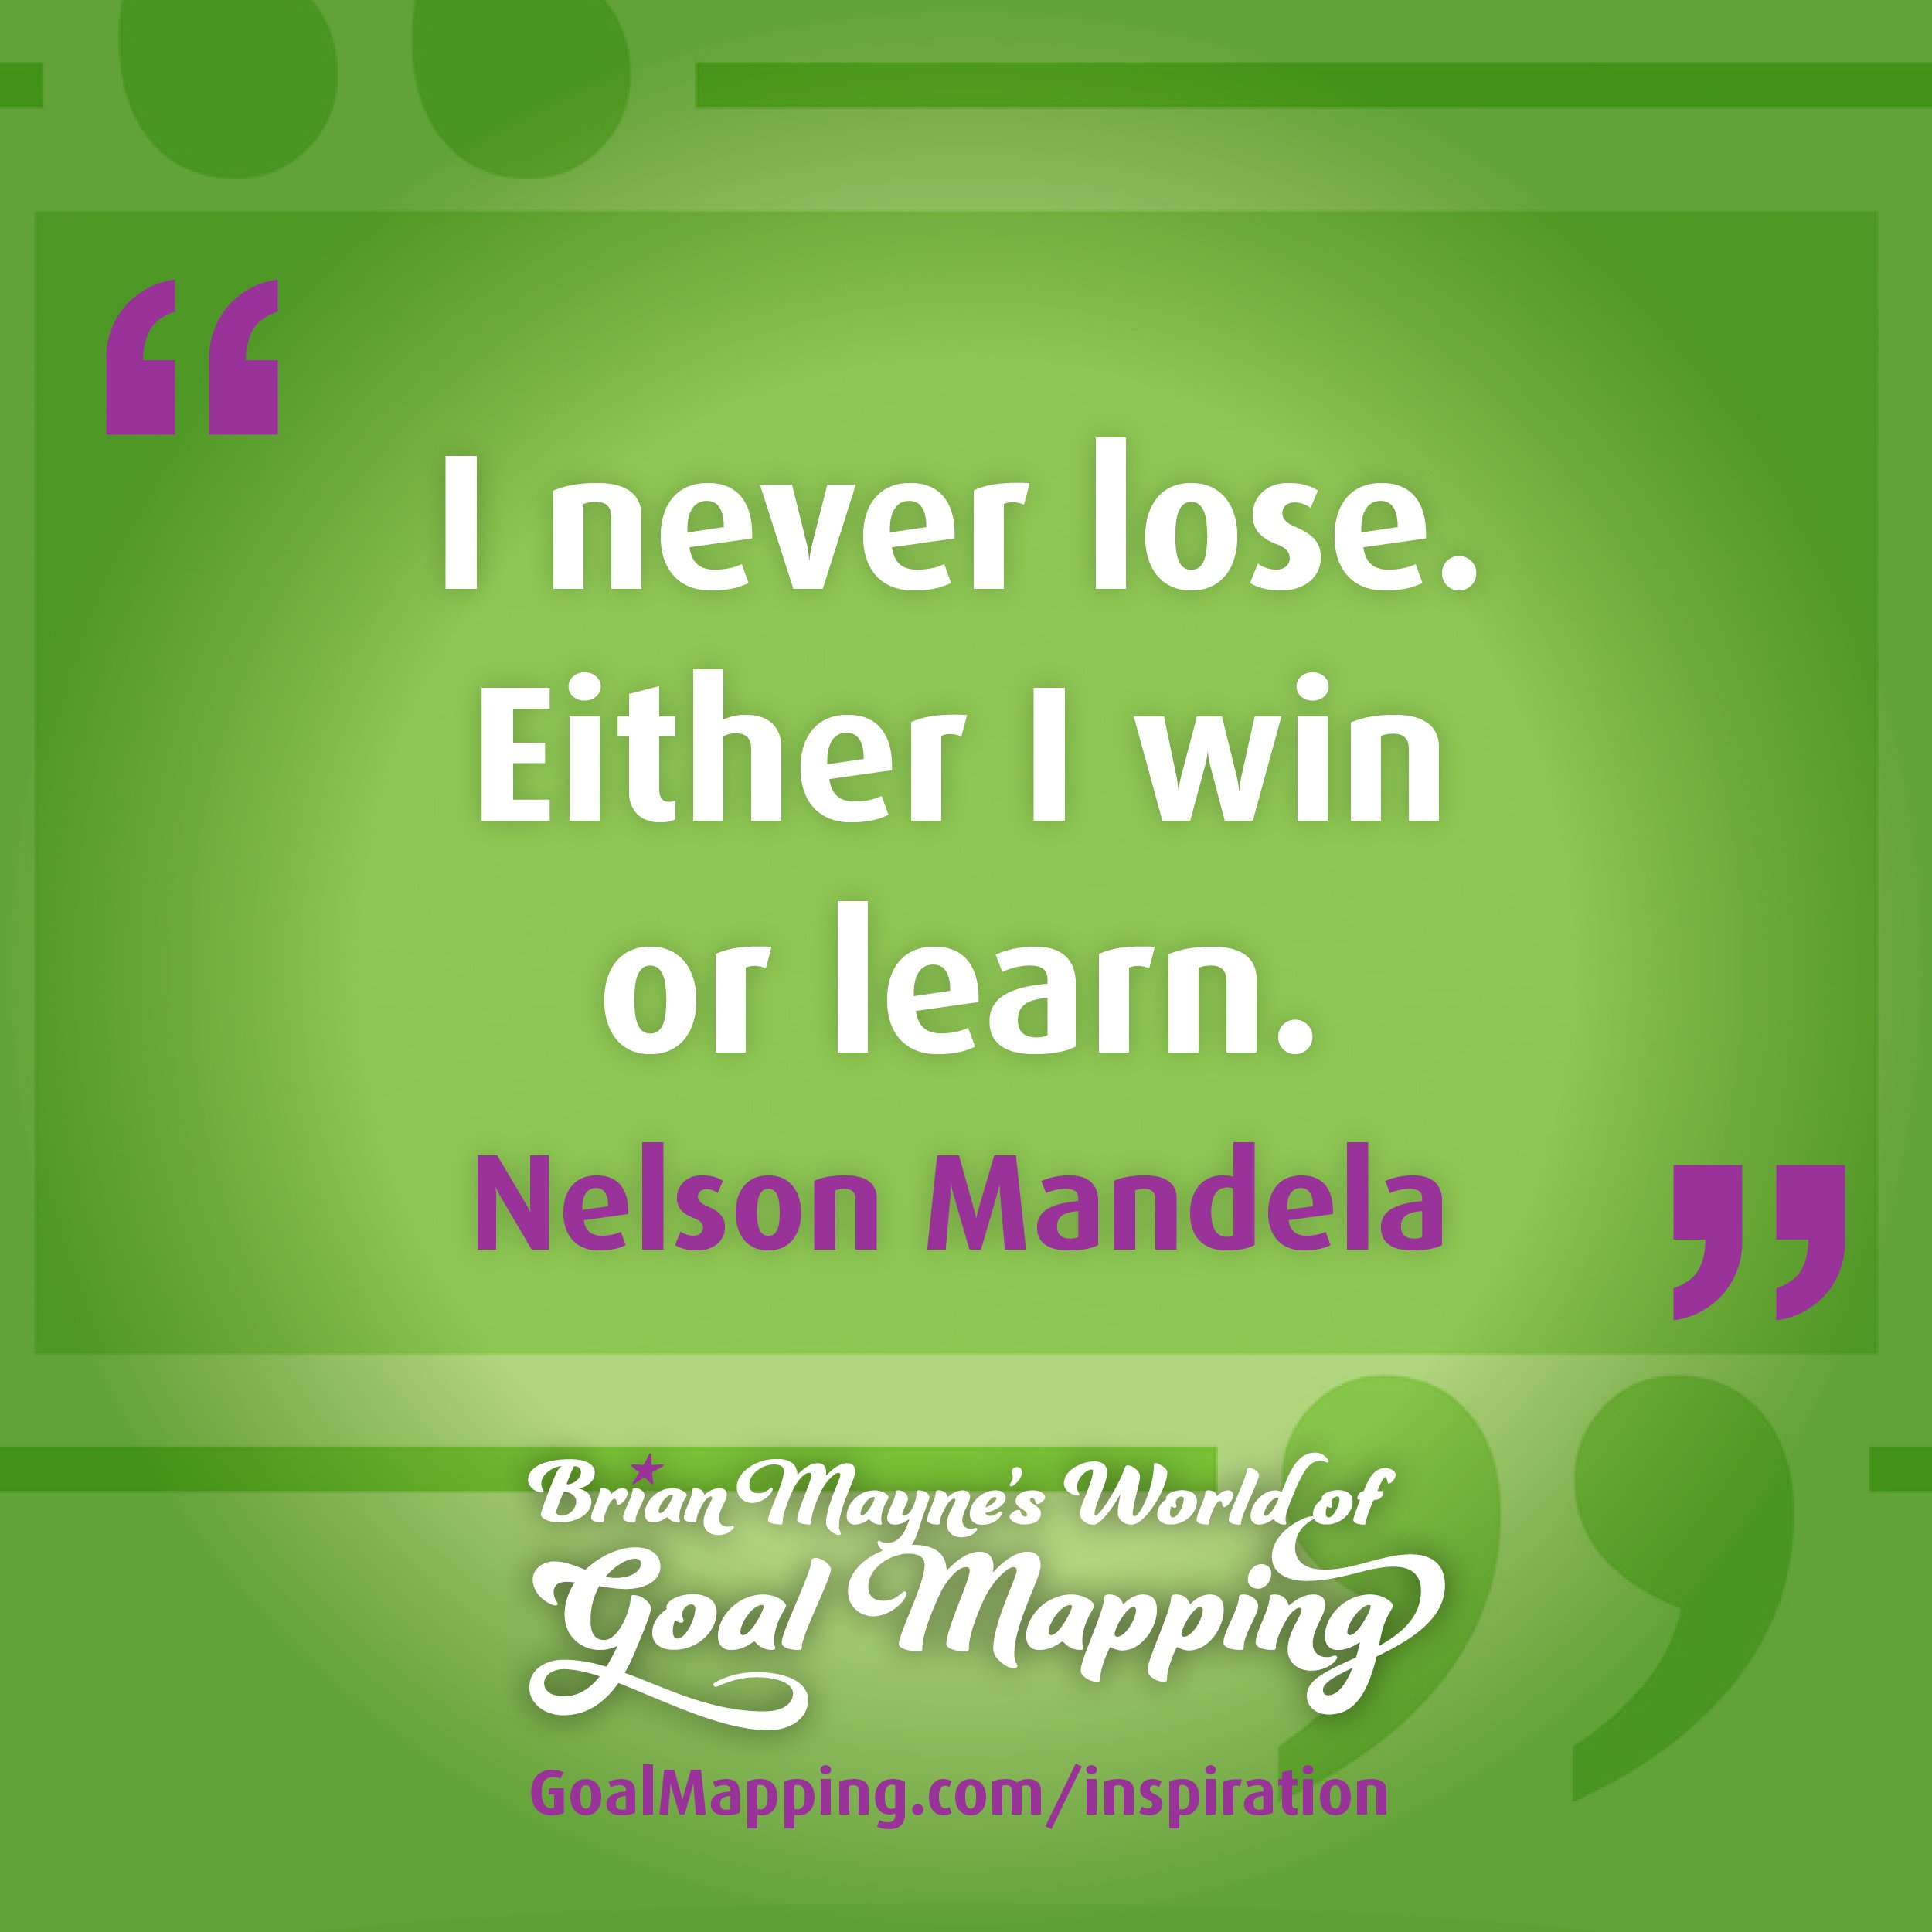 "I never lose. Either I win or learn." Nelson Mandela